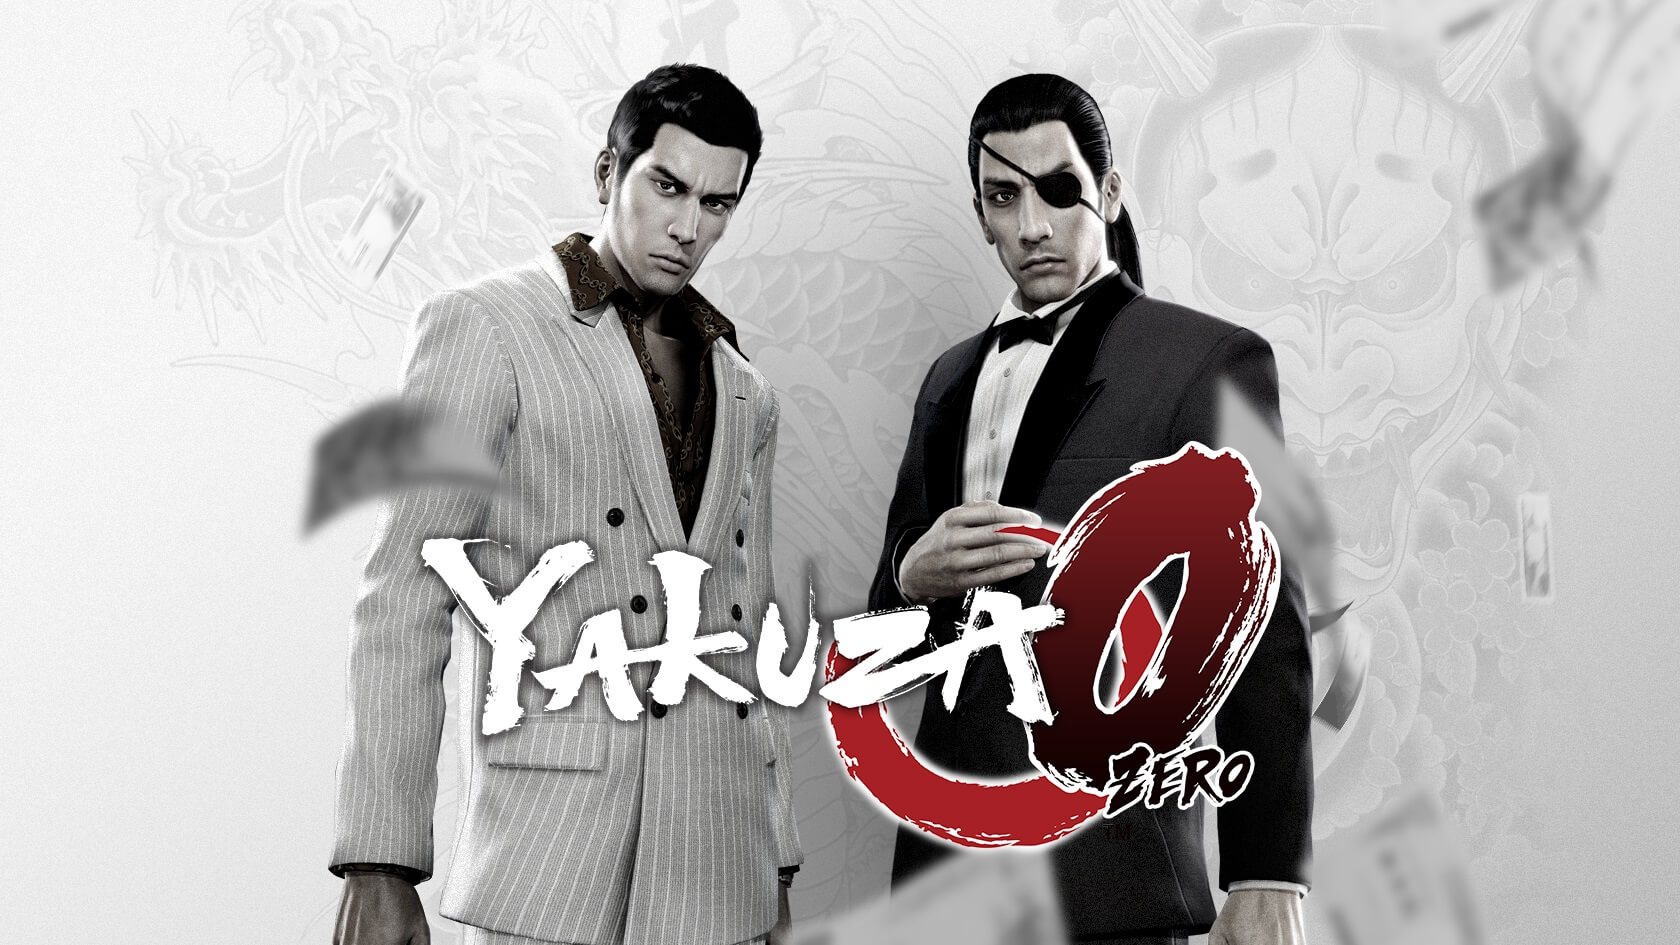 Yakuza 0 Patch 2 Is Now Available Adjusts Camera Position Fixes High Cpu Resource Usage Issue And More